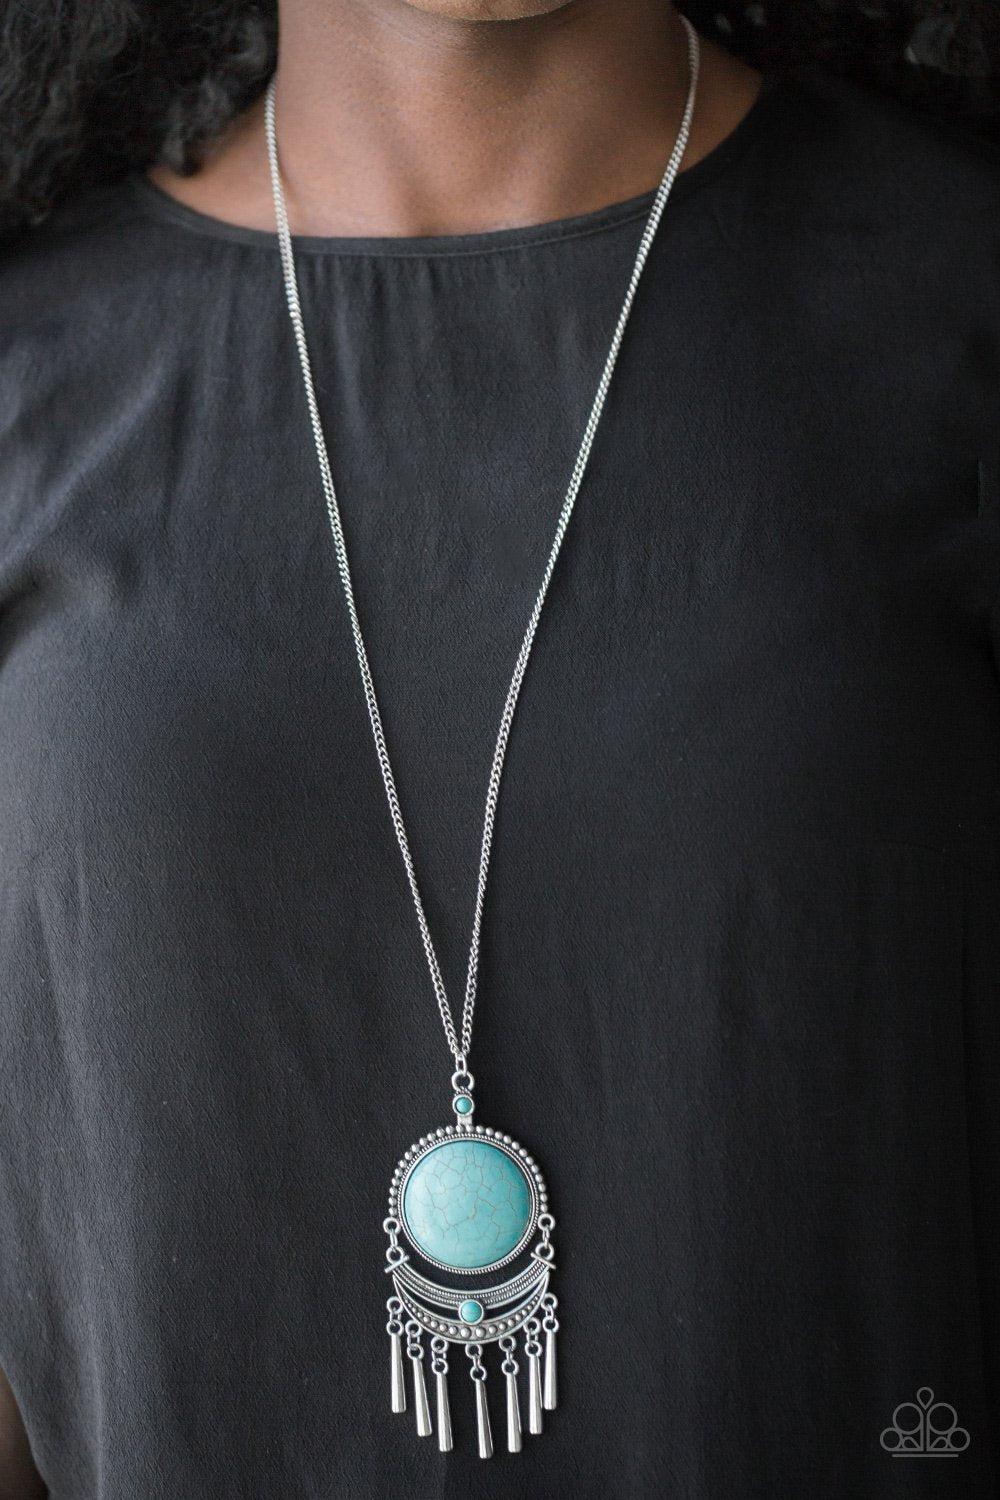 Rural Rustler Turquoise Blue Stone Necklace - Paparazzi Accessories- lightbox - CarasShop.com - $5 Jewelry by Cara Jewels